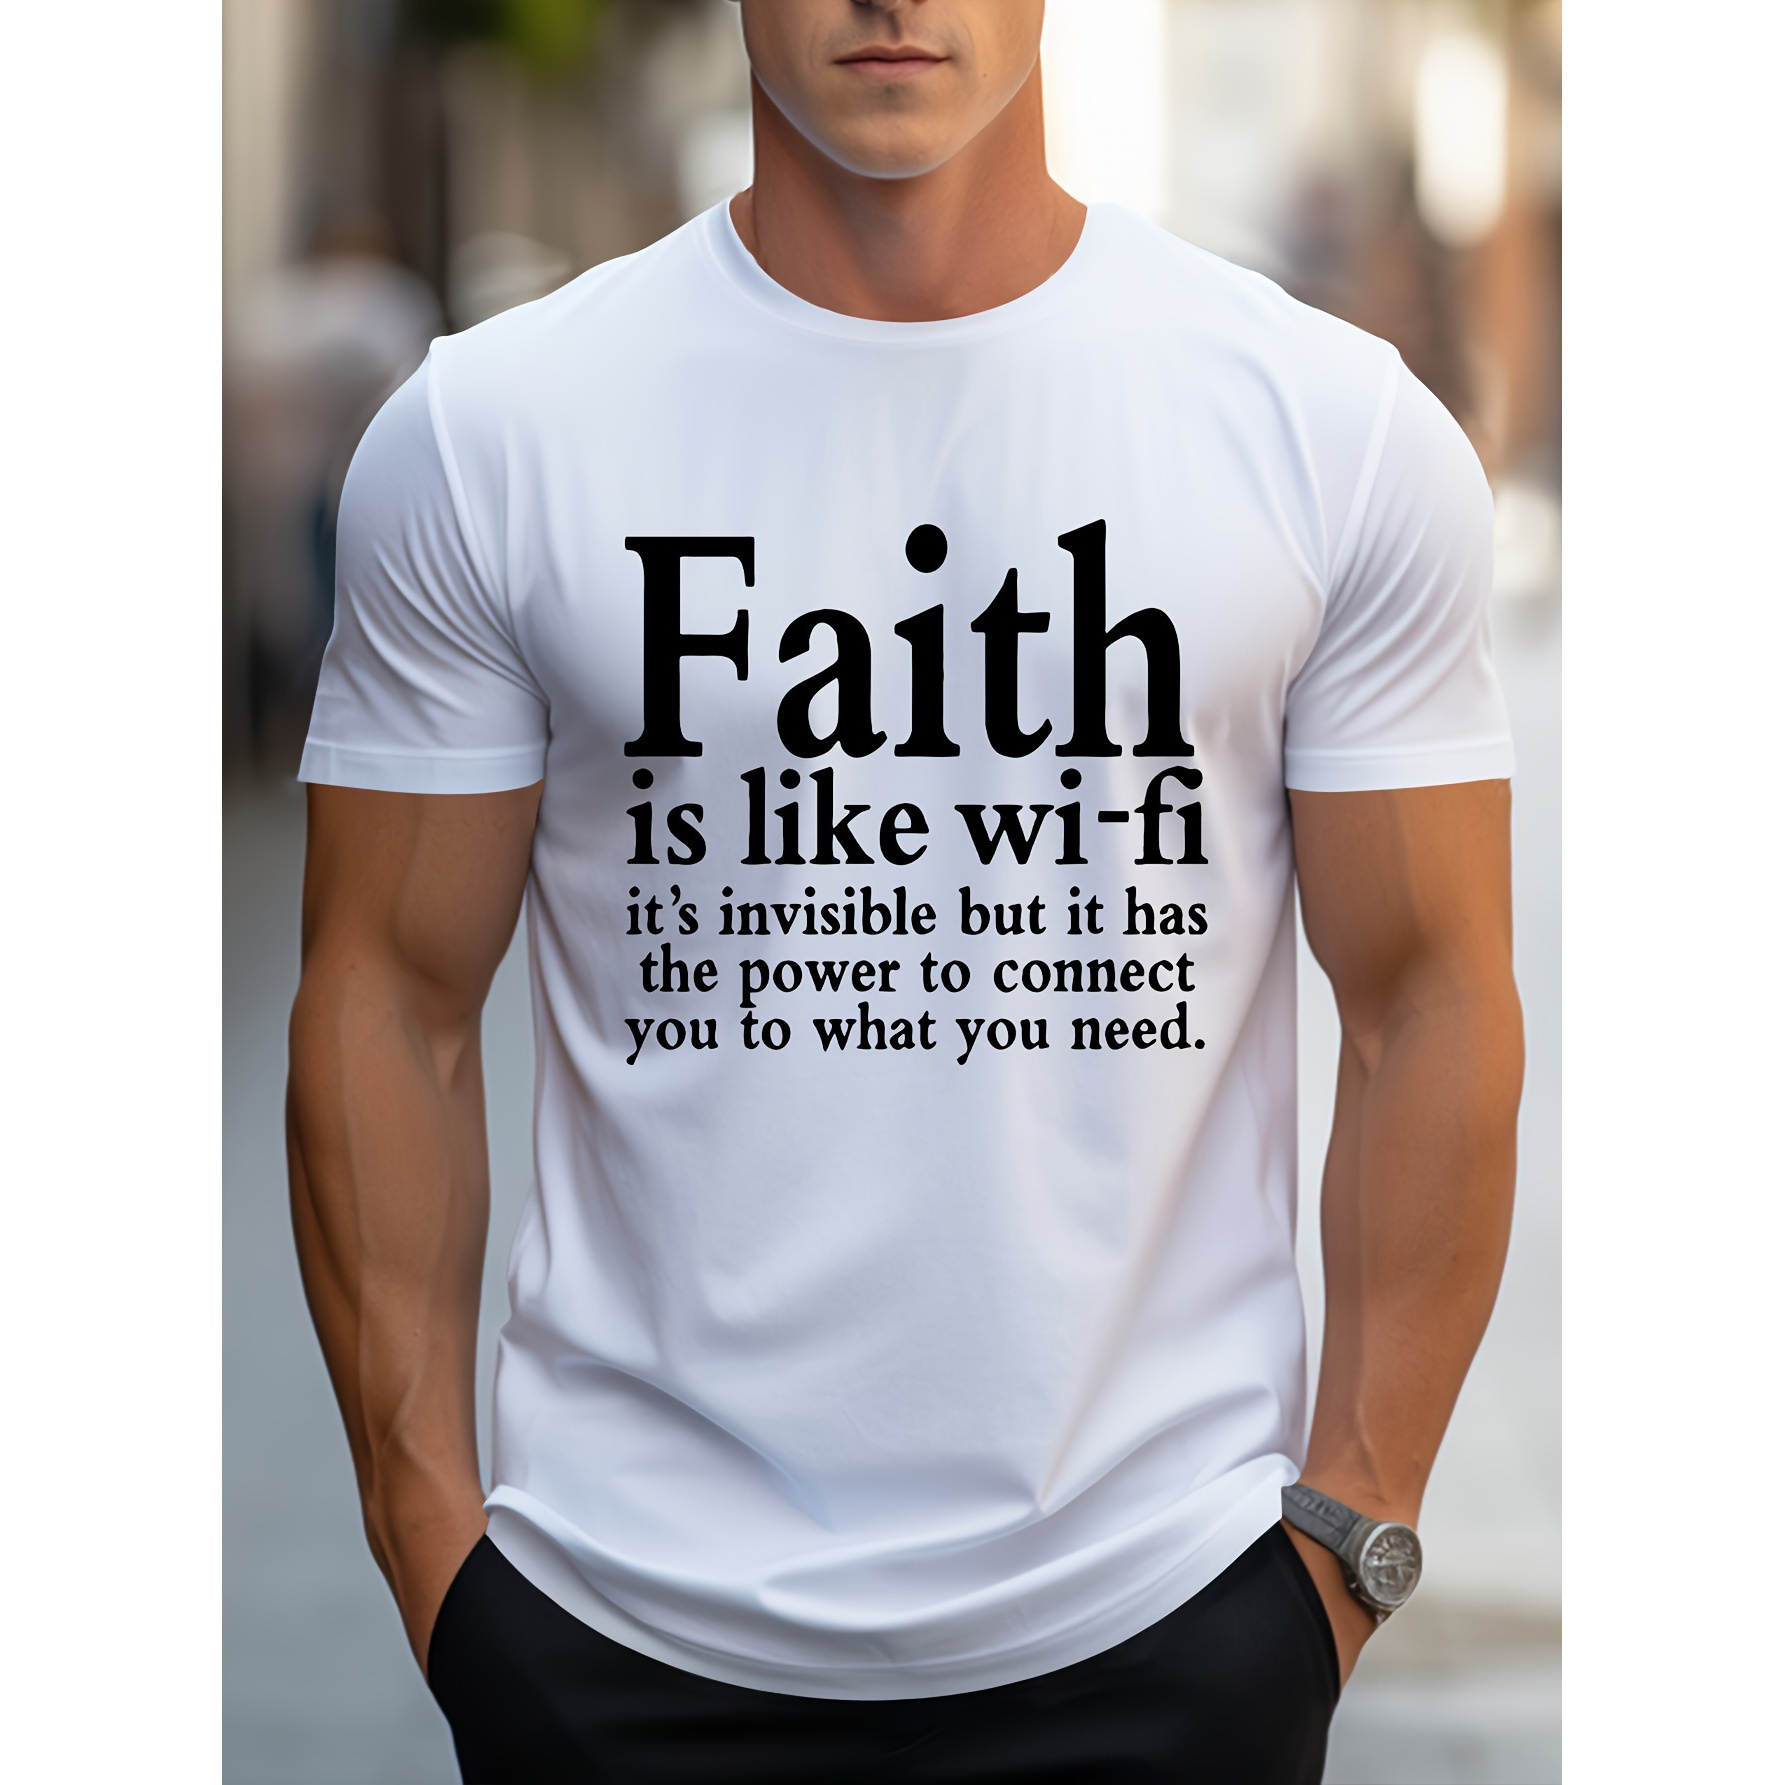 

Faith Is Like Wi Fi" Creative Print Casual Novelty T Shirt For Men, Short Sleeve Summer& Spring Top, Comfort Fit, Stylish Streetwear Crew Neck Tee For Daily Wear